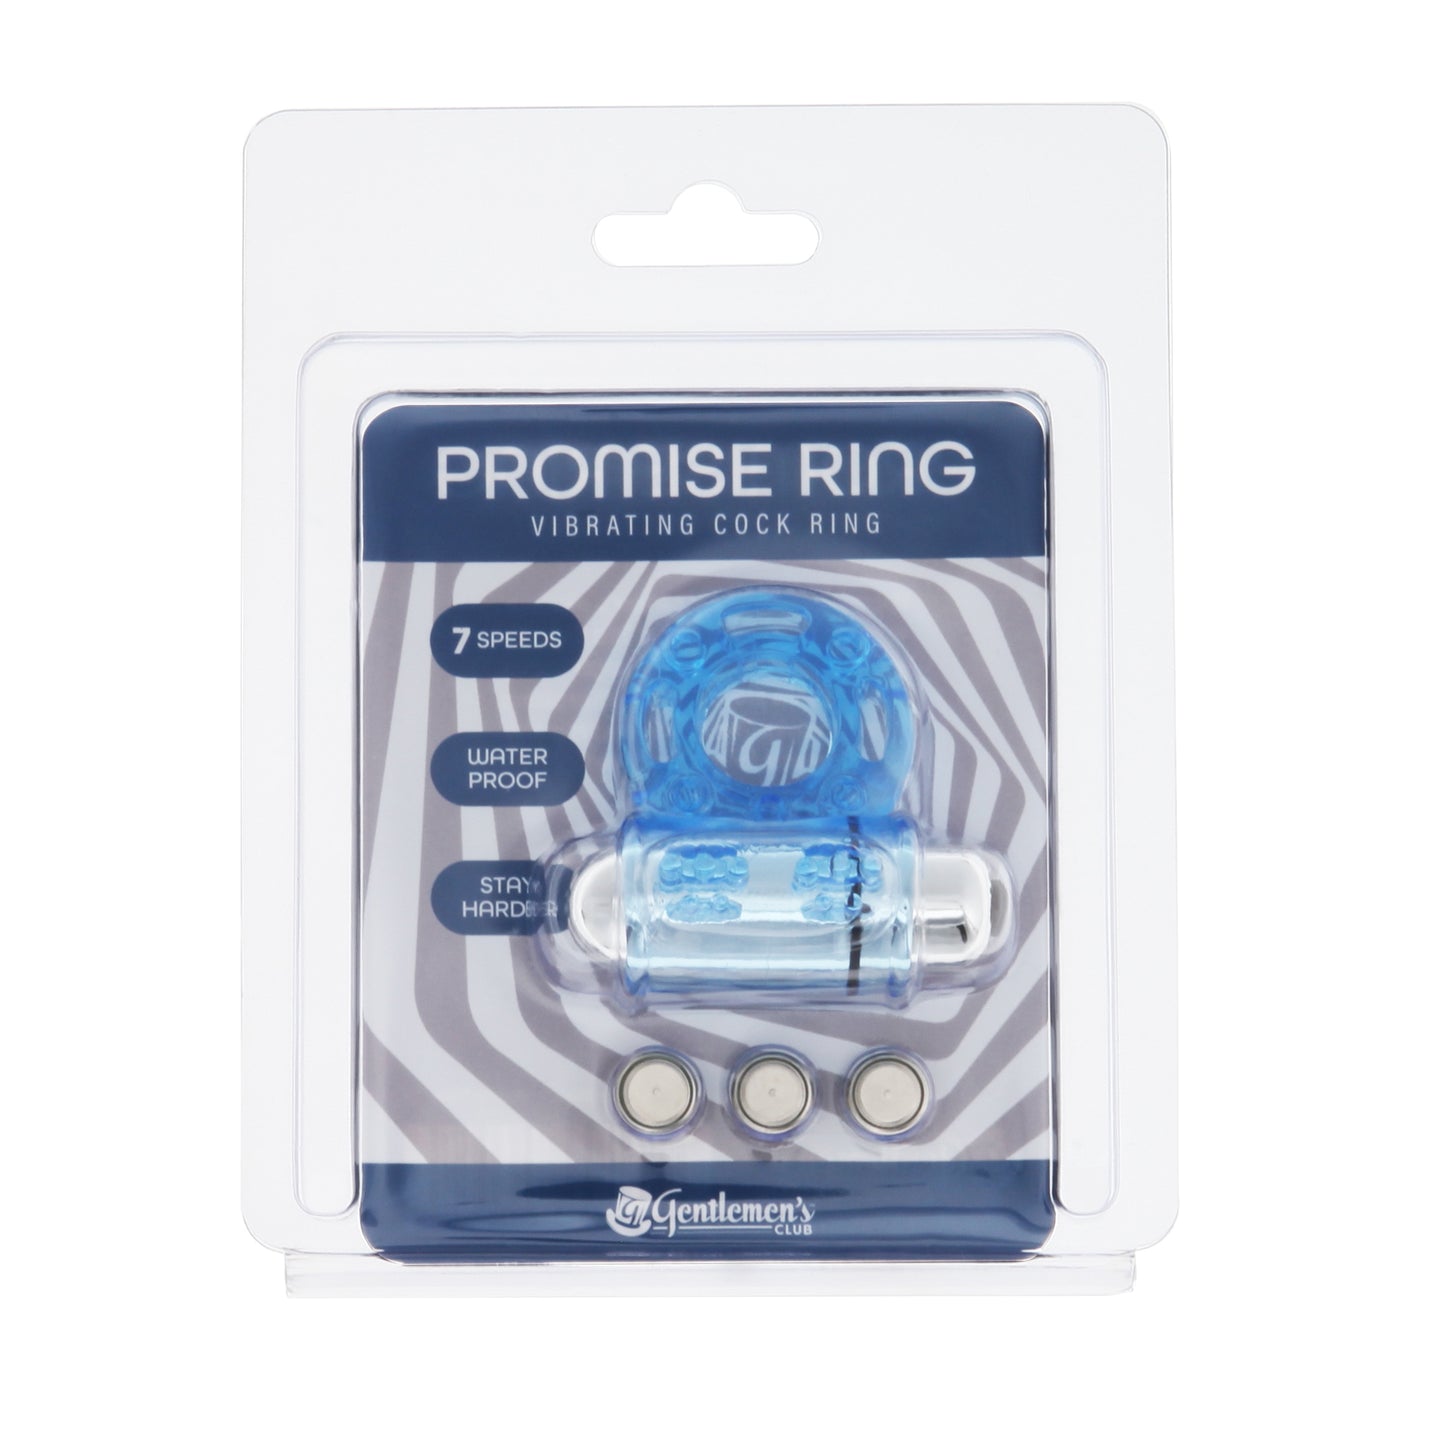 Vibrating Cock Ring - The Promise Ring